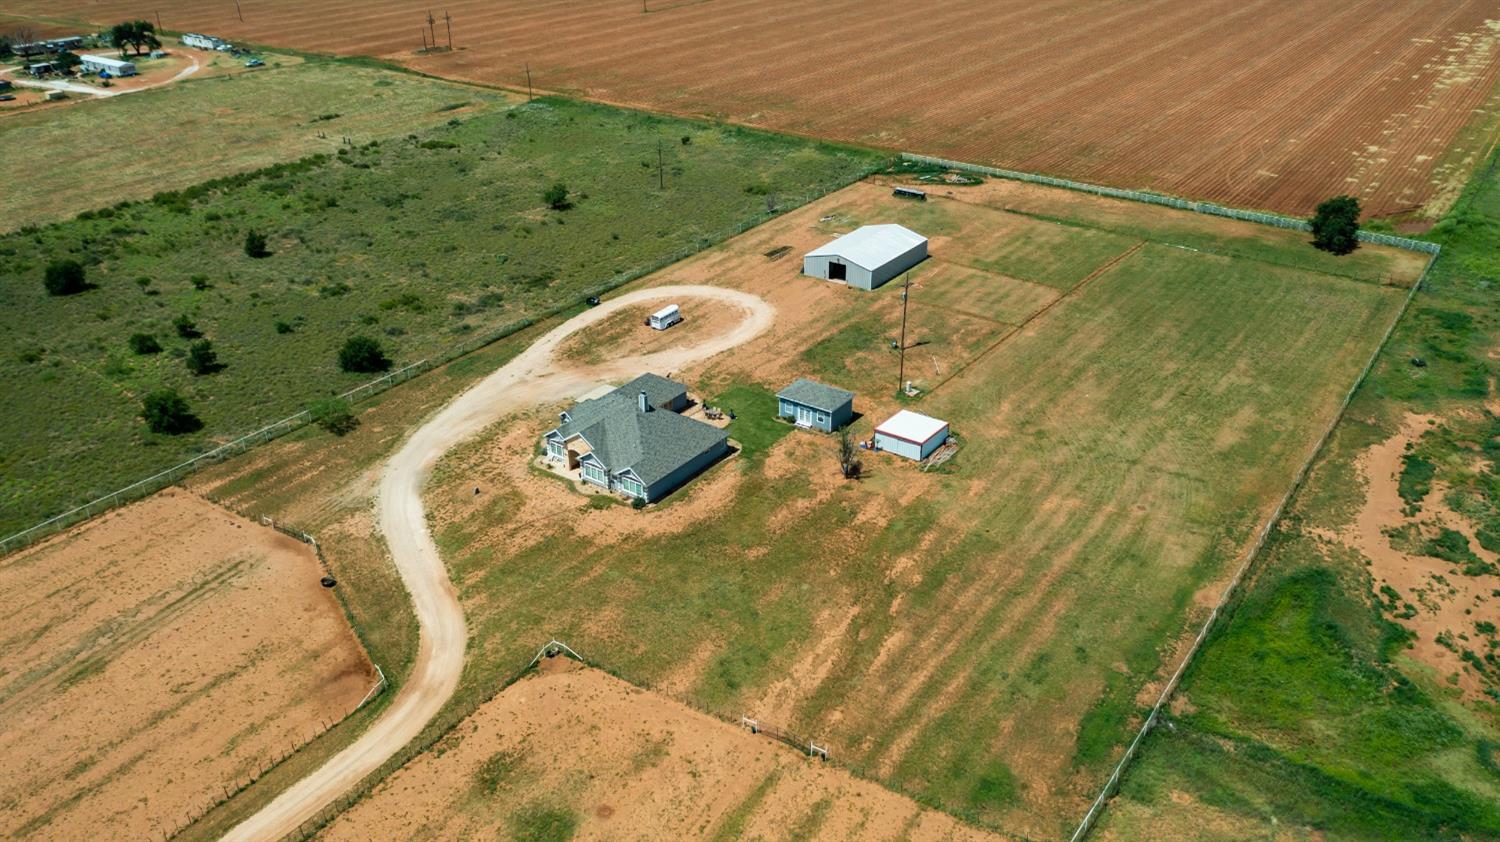 Your new Country Home is now on the Market. Located on just over 10 acres, this fully fenced with pipe fence and gate has all the amenities you want: 3 large horse pastures, a caliche driveway, 2 wells, 8 stall barn with tackroom, a saddle area, breeding stocks on re-enforced concrete slab. Plenty of room to easily add an arena. There are 2 concrete slabs in the front pasture with easy access to electricity and water. Inside the home you have a beautiful country 3 bed 2 bath home with granite counters throughout, plenty of storage, built-ins, tall ceilings, a full-functioning kitchen and spacious rooms. There is a back separate home that has its own septic tank as well. The back house is a Studio-style home with a shower, sink, toilet, AC window unit and cable access. This custom home is looking for THE country buyer. Only minutes from Lubbock. You are invited to your comfort, peace and life-style in your new home.